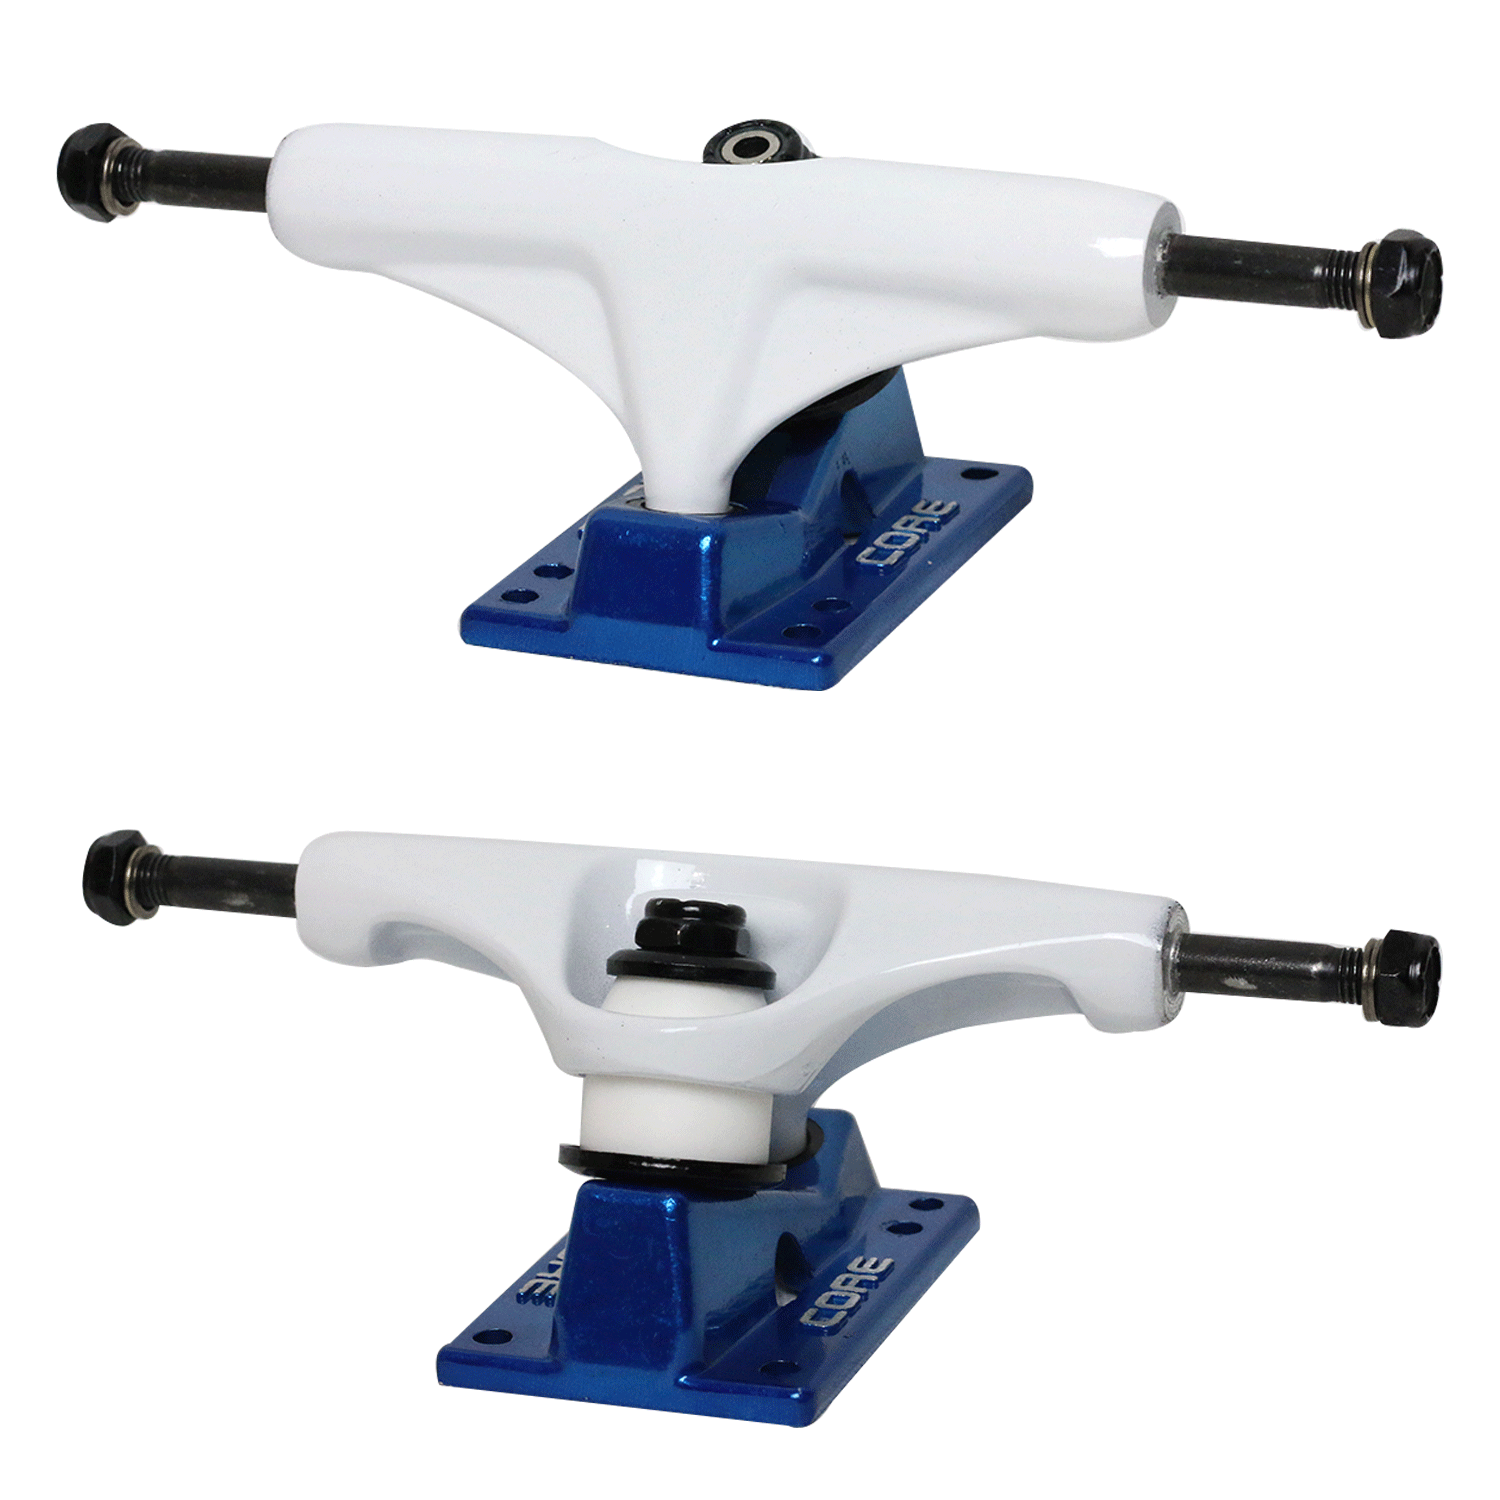 Core White Trucks With Blue Hollow Trucks 5.0